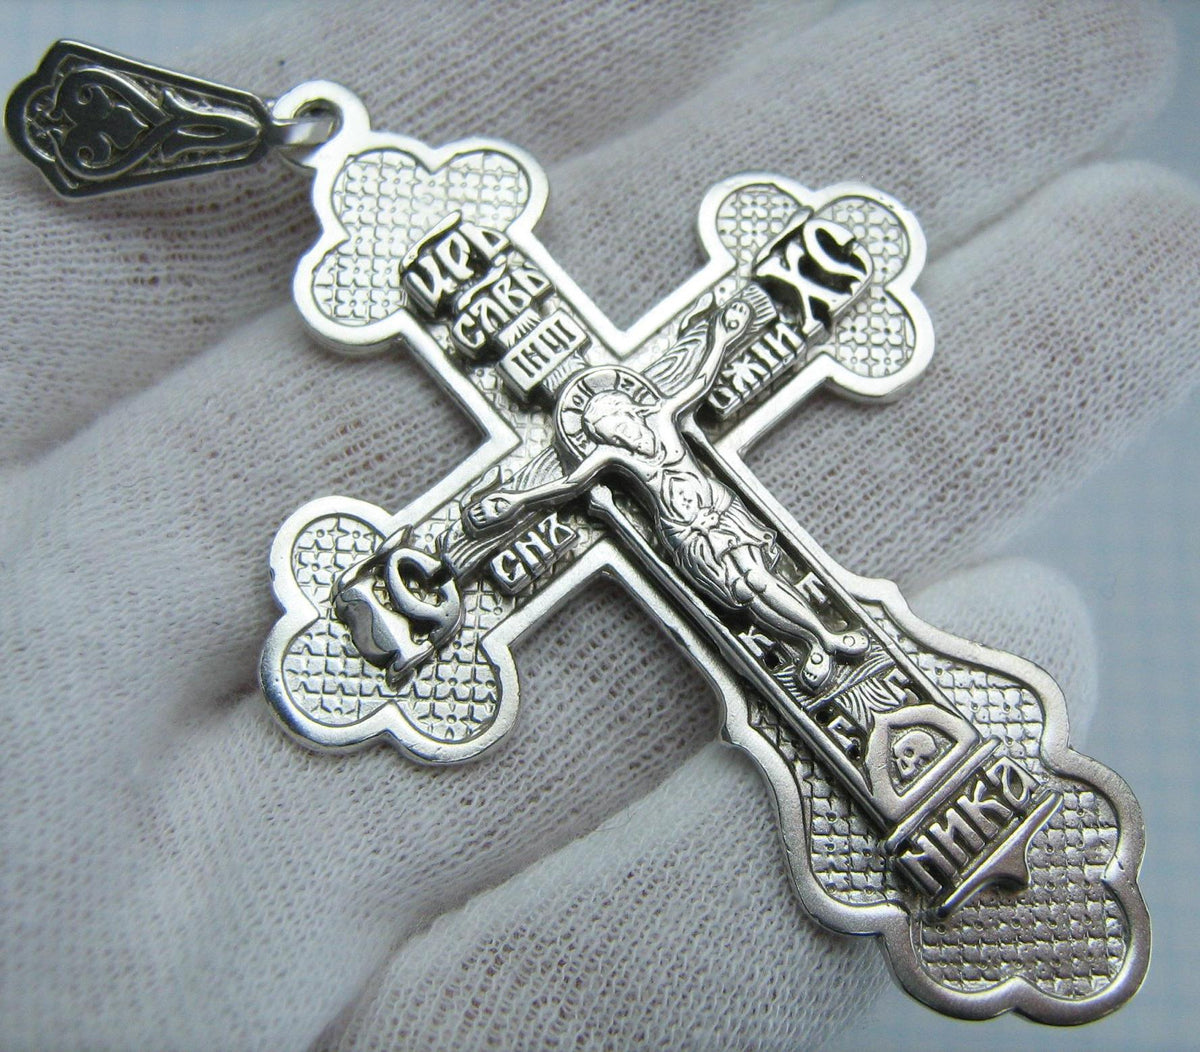 SOLID 925 Sterling Silver Cross Pendant Necklace Heavy Large Crucifix  Amulet Religious Pattern Vintage Christian Church Fine Faith Jewelry  CR000556